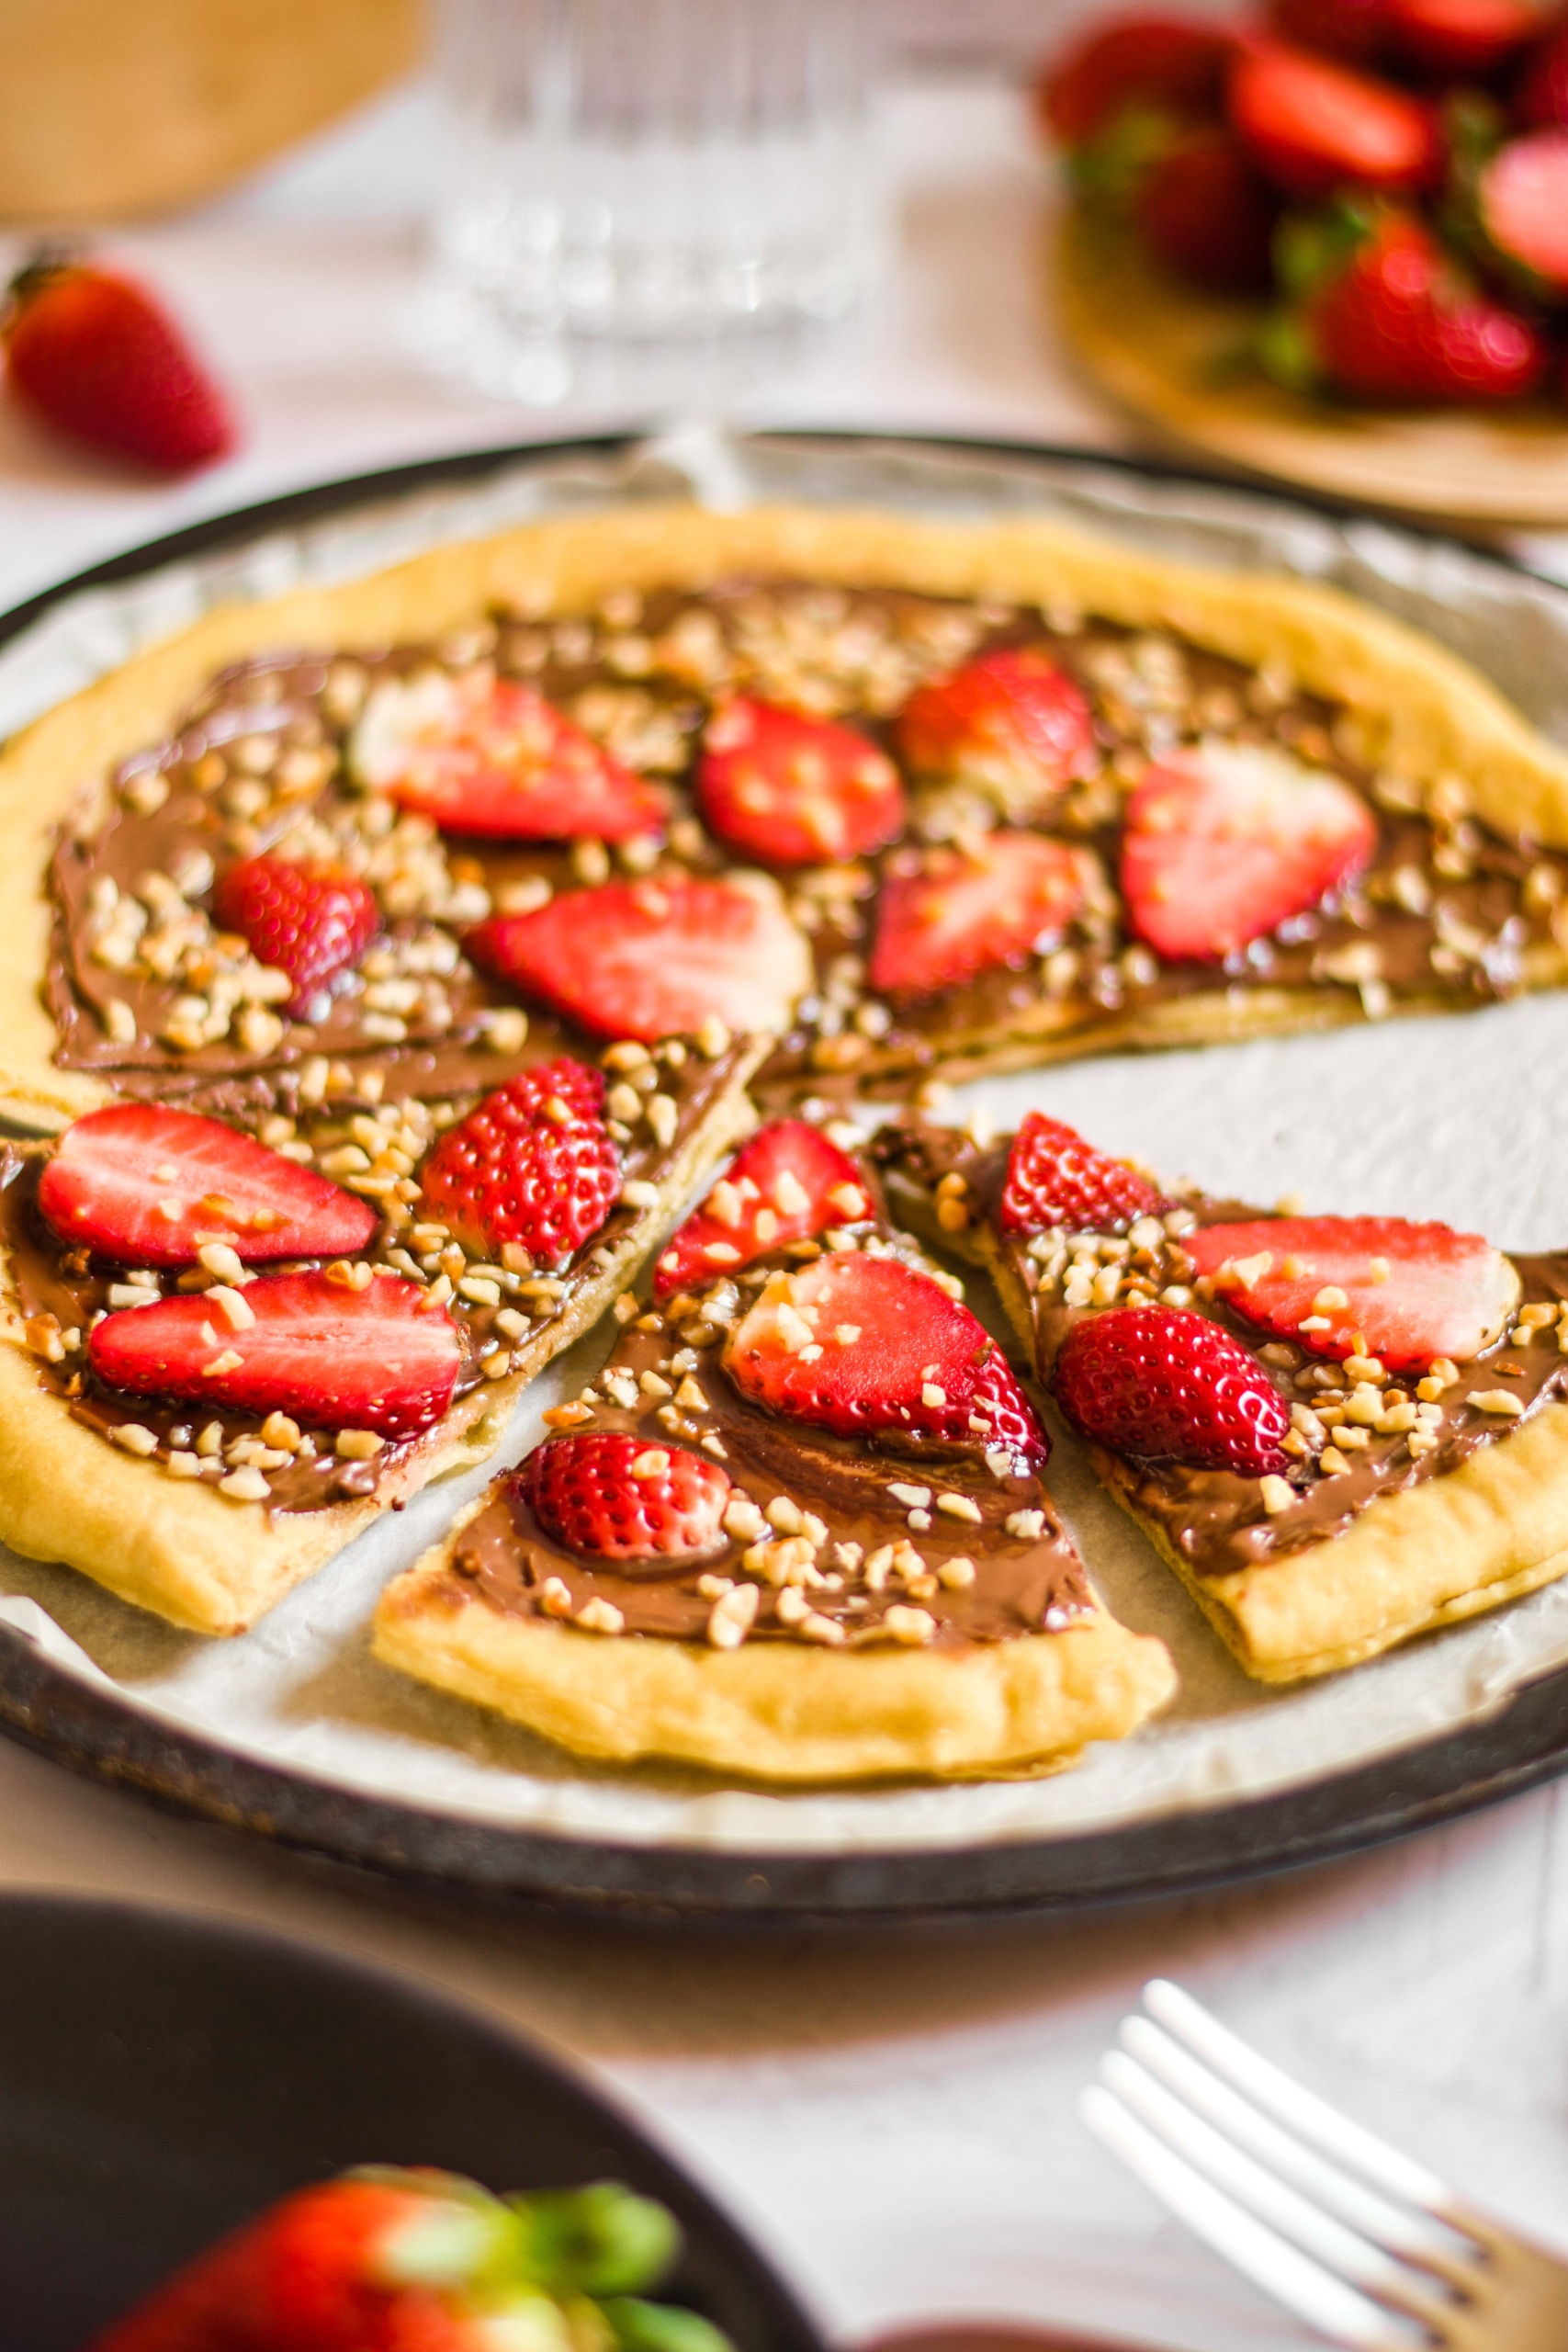 Sliced chocolate dessert pizza topped with strawberries and chopped hazelnuts.